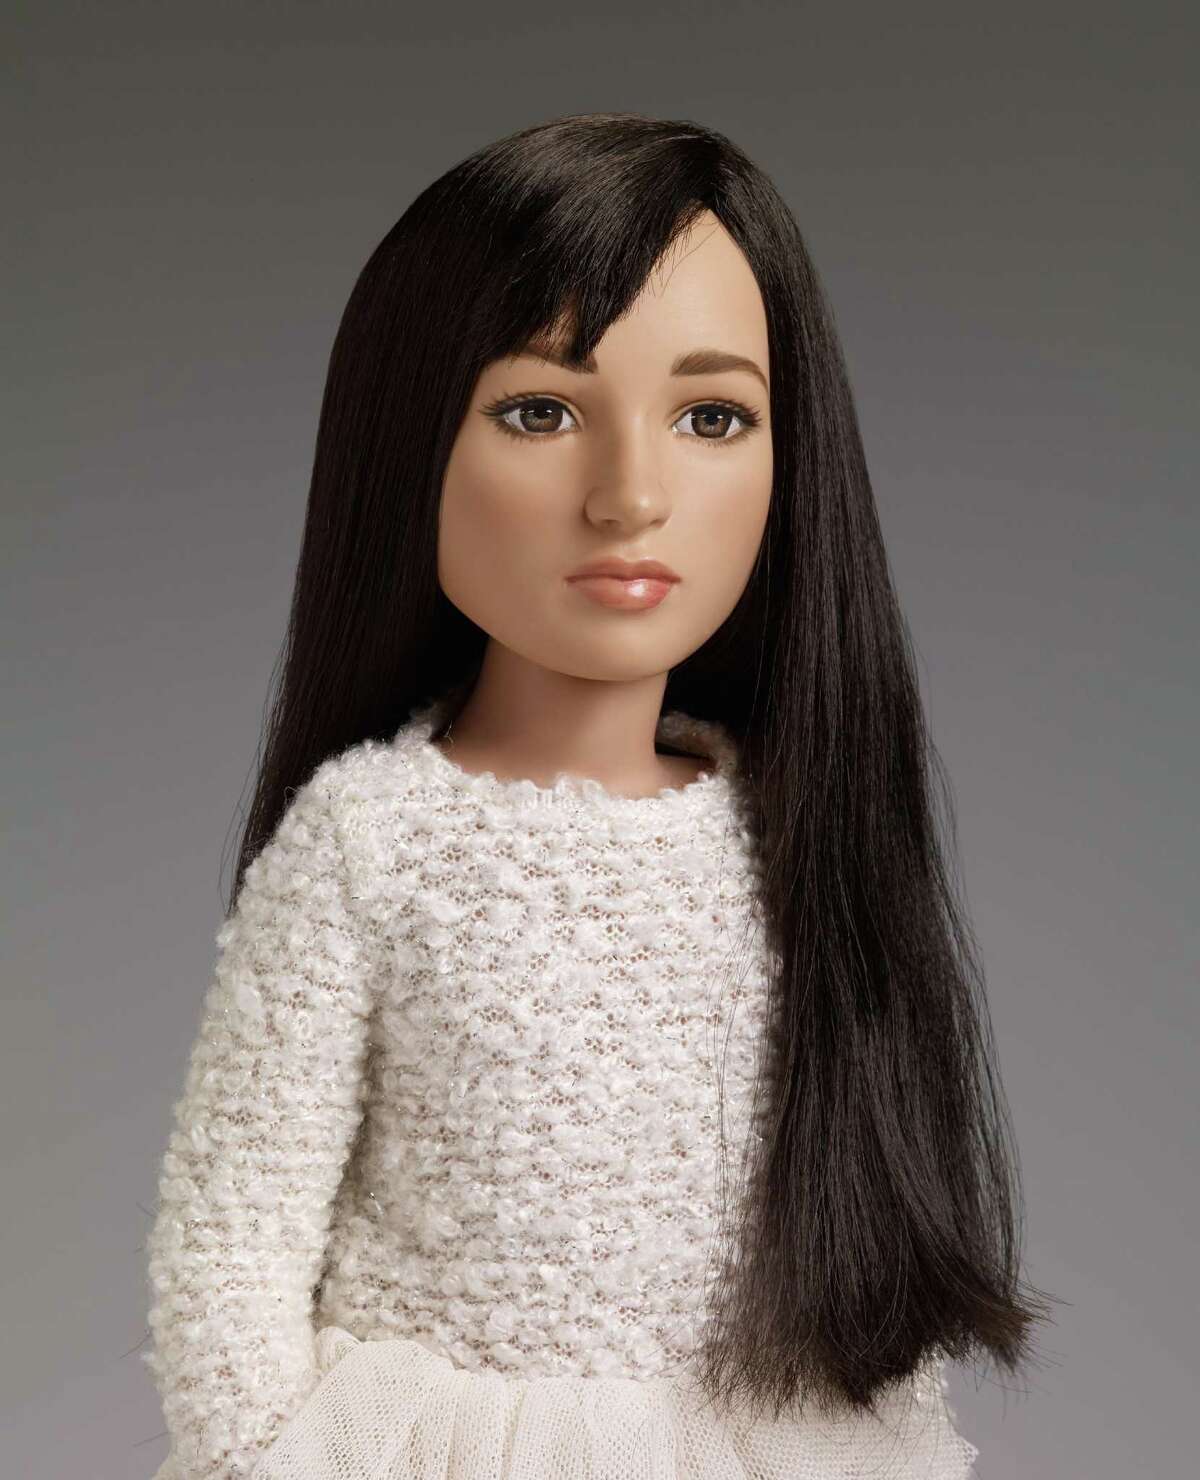 This doll, based on Jazz Jennings, will make its debut at the New York Toy Fair.